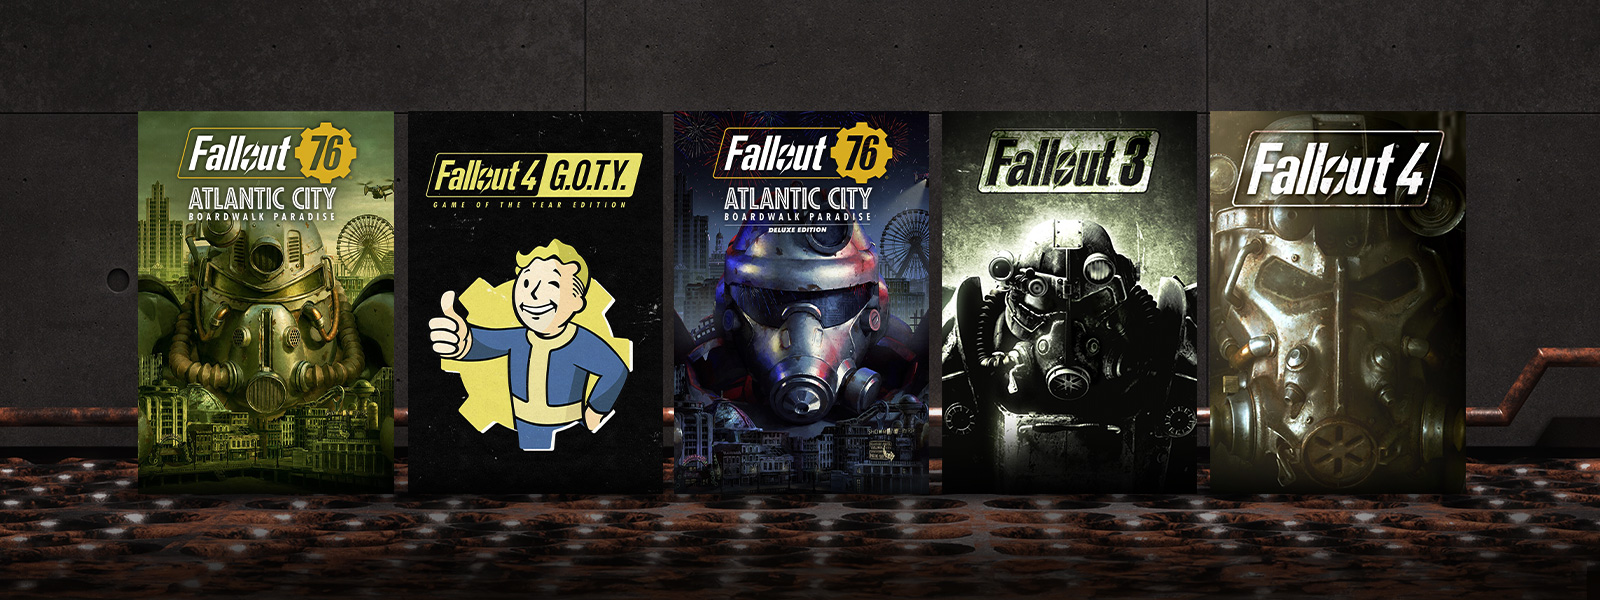 Box art from games included in the Fallout Franchise Sale, including Fallout 76: Atlantic City - Boardwalk Paradise Deluxe Edition, Fallout 4: Game of the Year Edition, and Fallout 3.